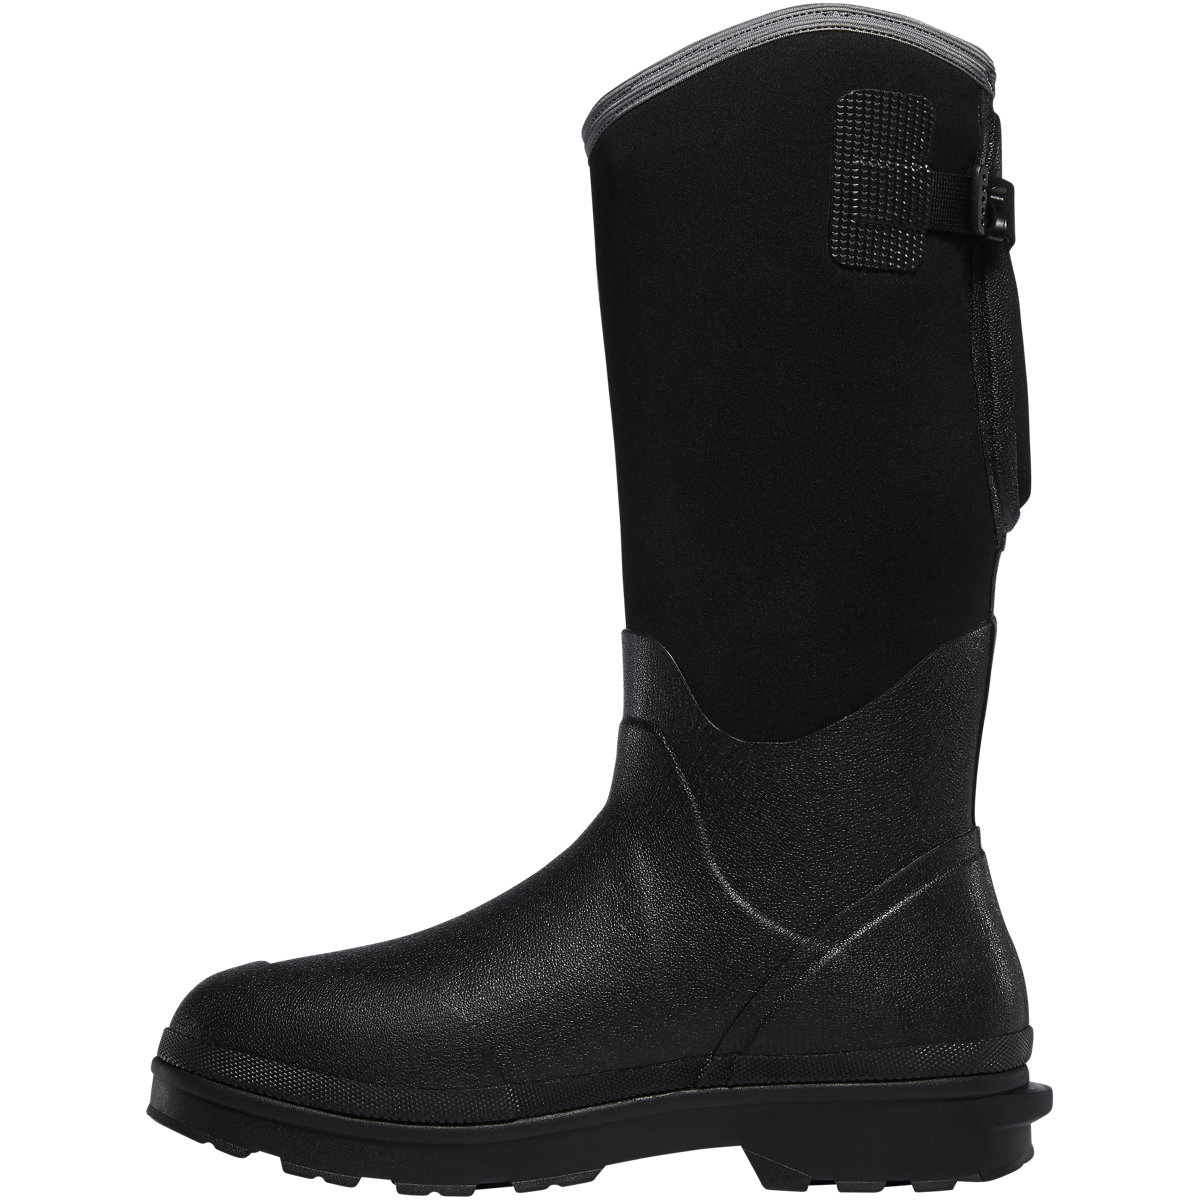 Lacrosse Alpha Range Black 5.0mm Rubber Work Boots with Composite Toe from GME Supply